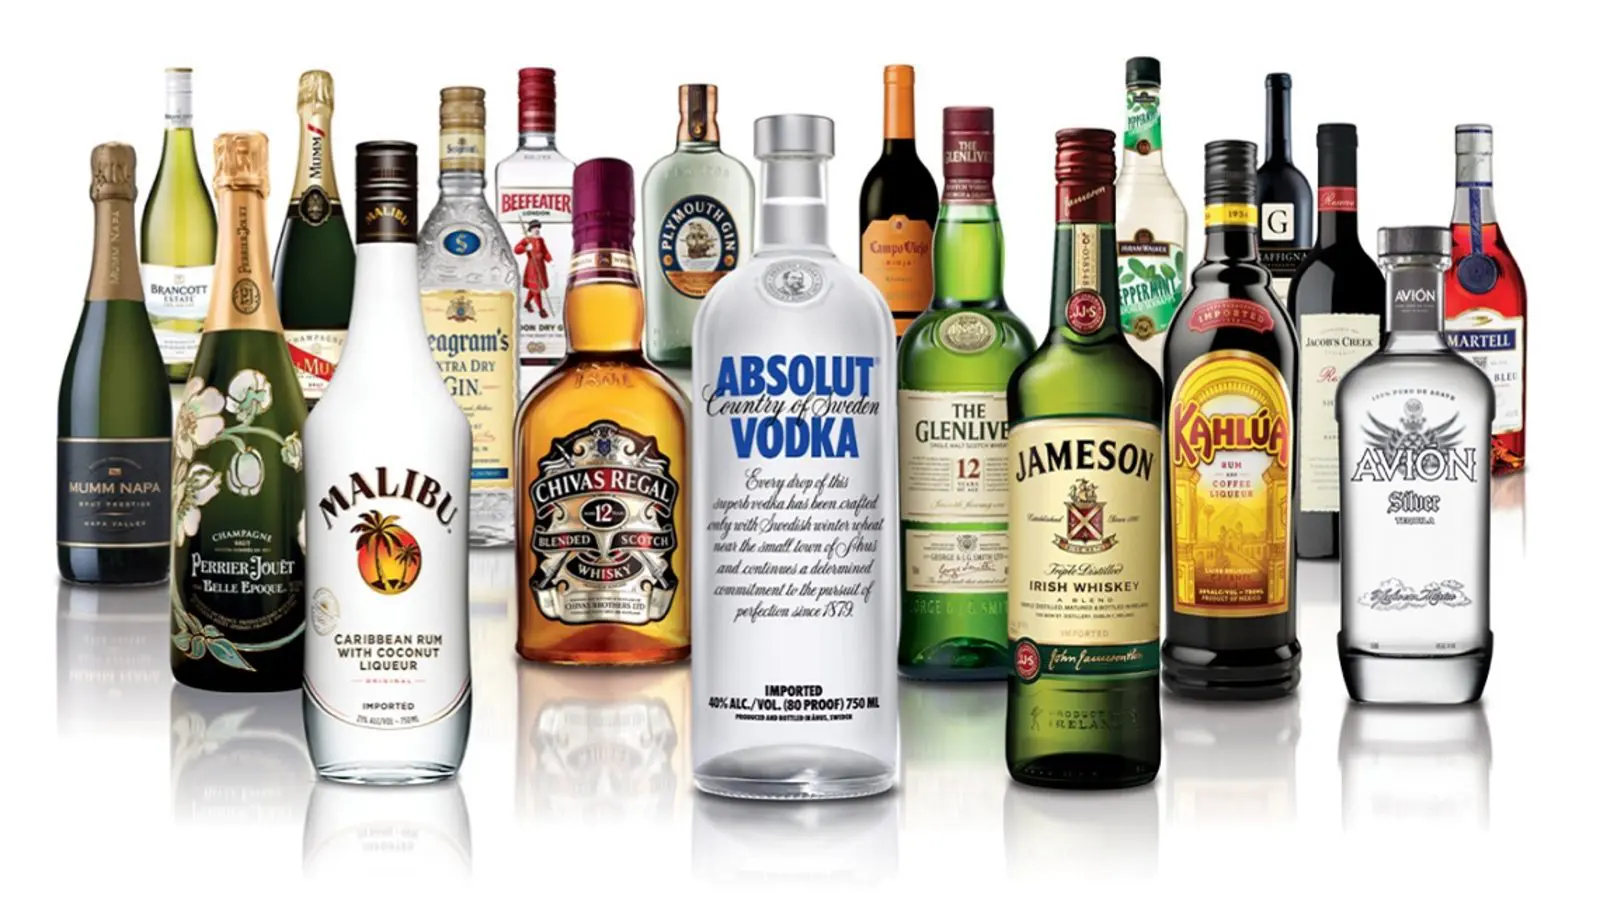 Pernod Ricard reports symbolic milestone of surpassing US$10Bn sales in fiscal year 2022